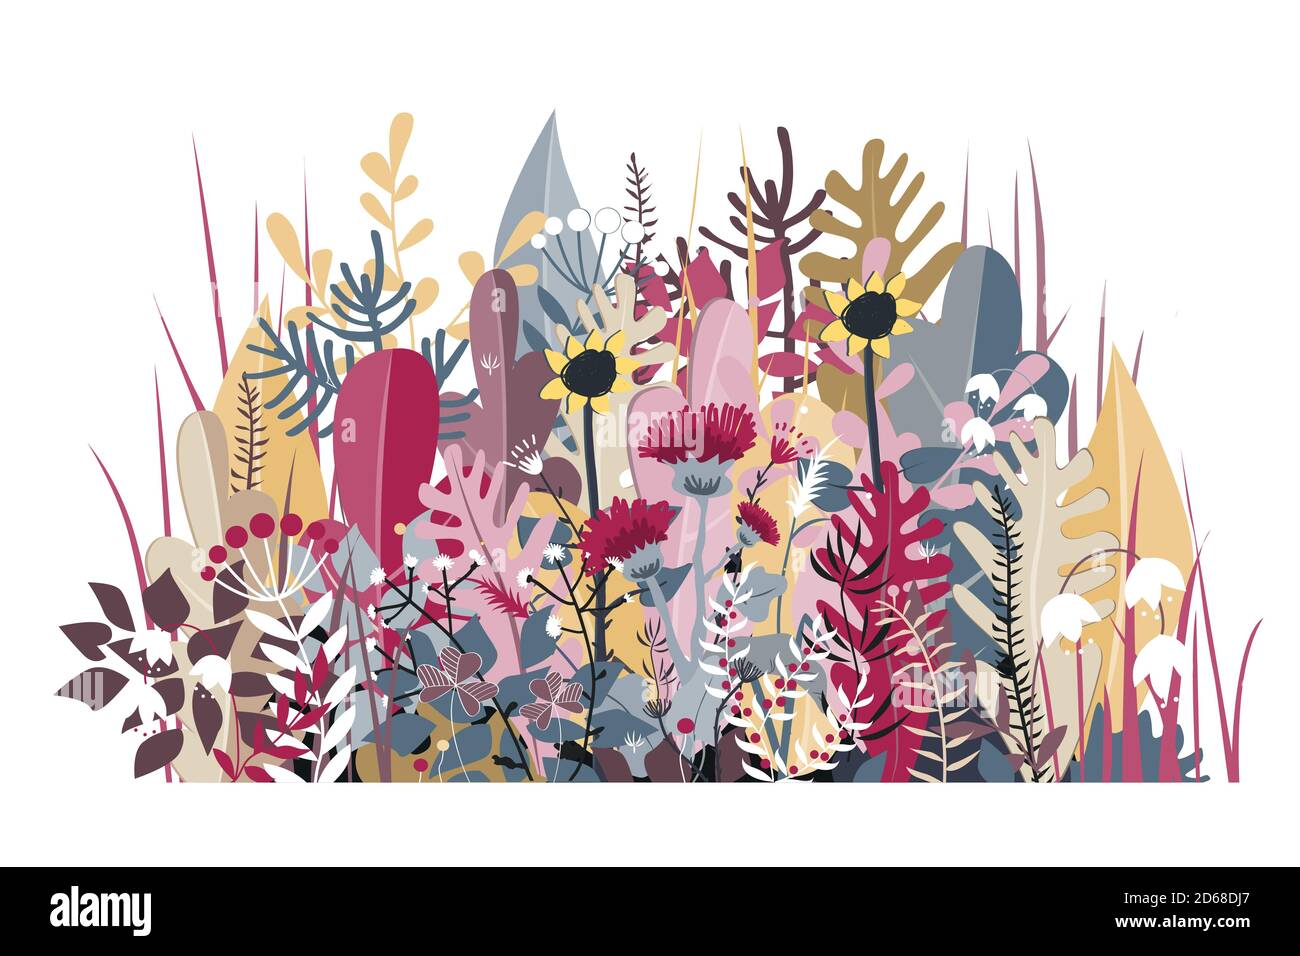 Doodle forest background of stylized autumn flowers, leaves and trees for greeting cards, textile, or banners. Meadow or forest border Stock Vector